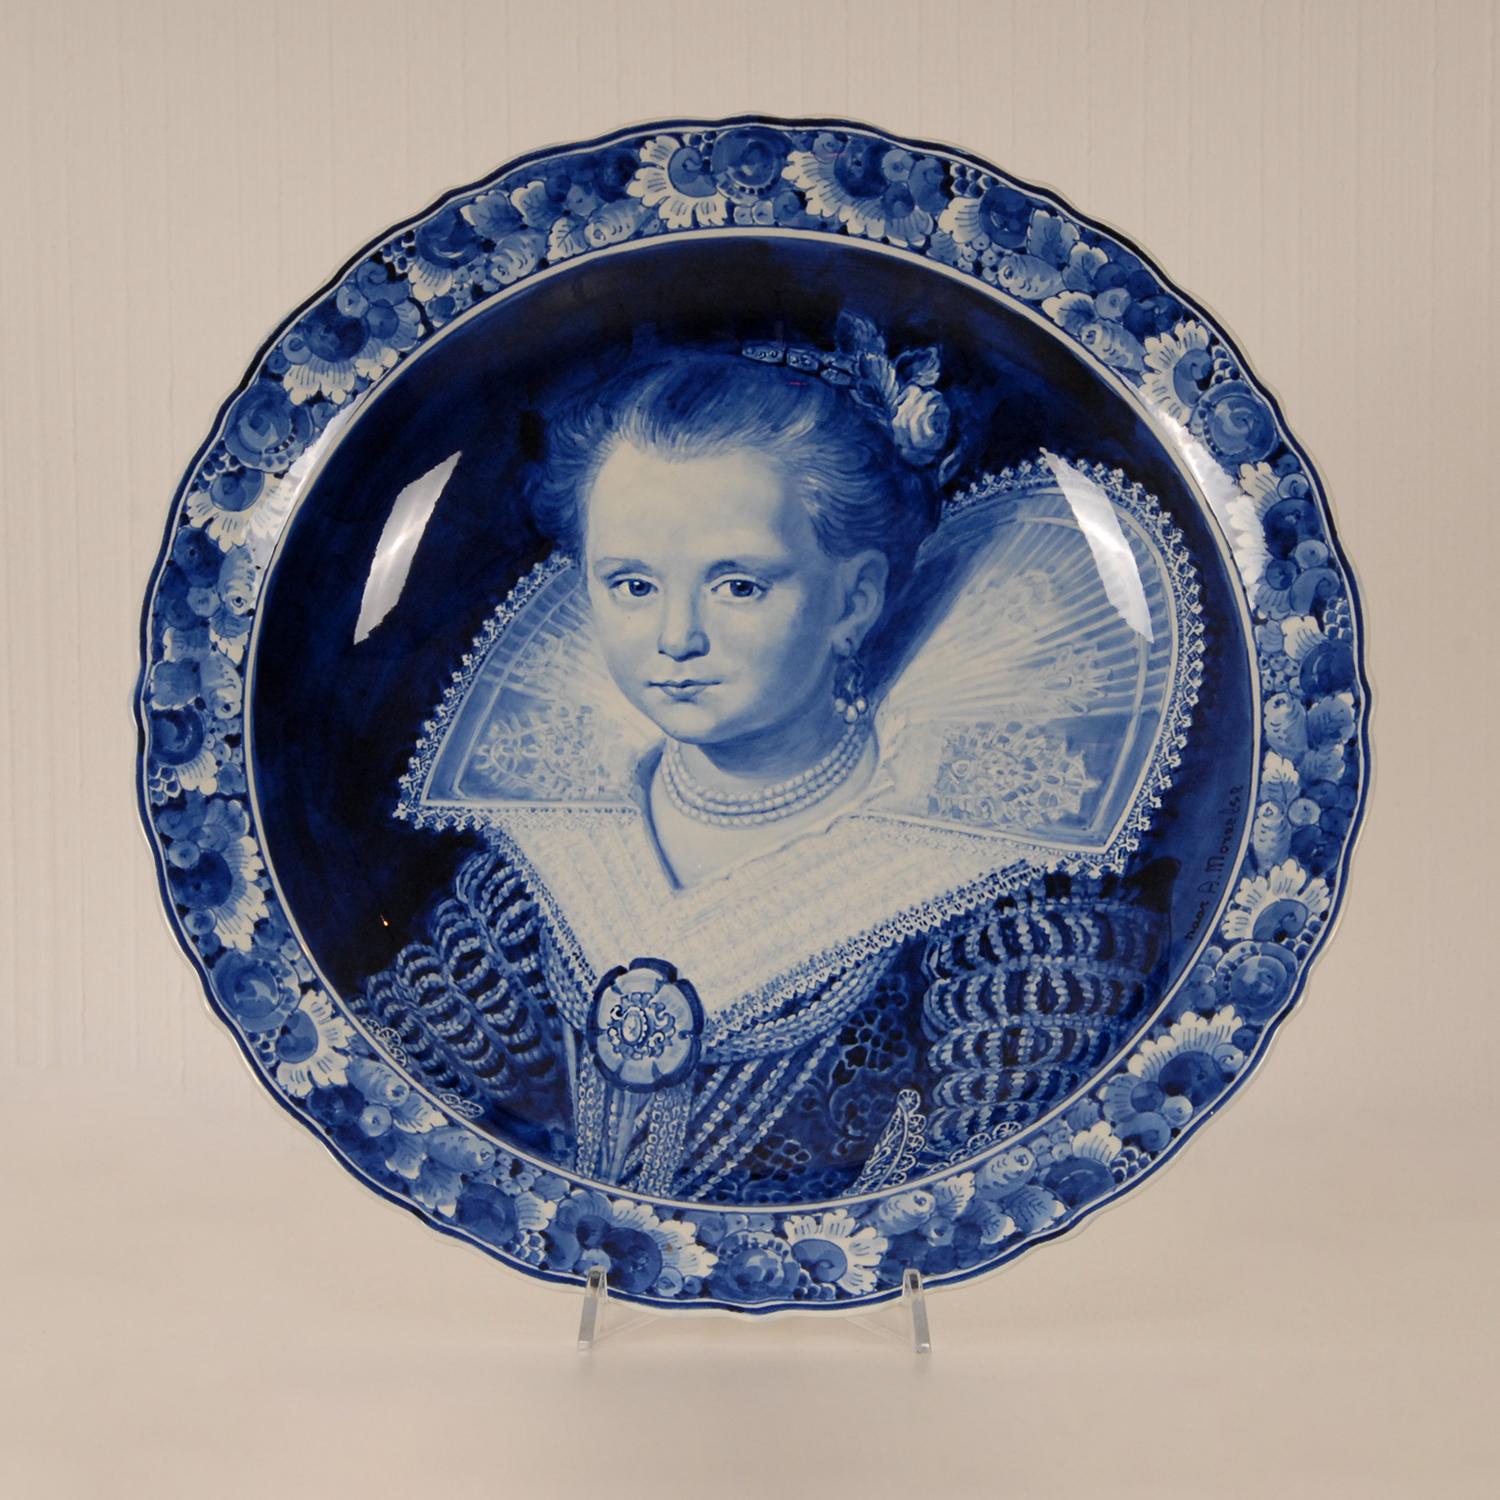 Handpainted Dutch Delft (Delftware -earthenware)
Large blue and white cabinet collectors plate - wall plaque
Depicting a hand painted portrait of a little girl
Material: Delft
Marked: Royal Delft and signed
Stijl: Renaissance - Barok 17th